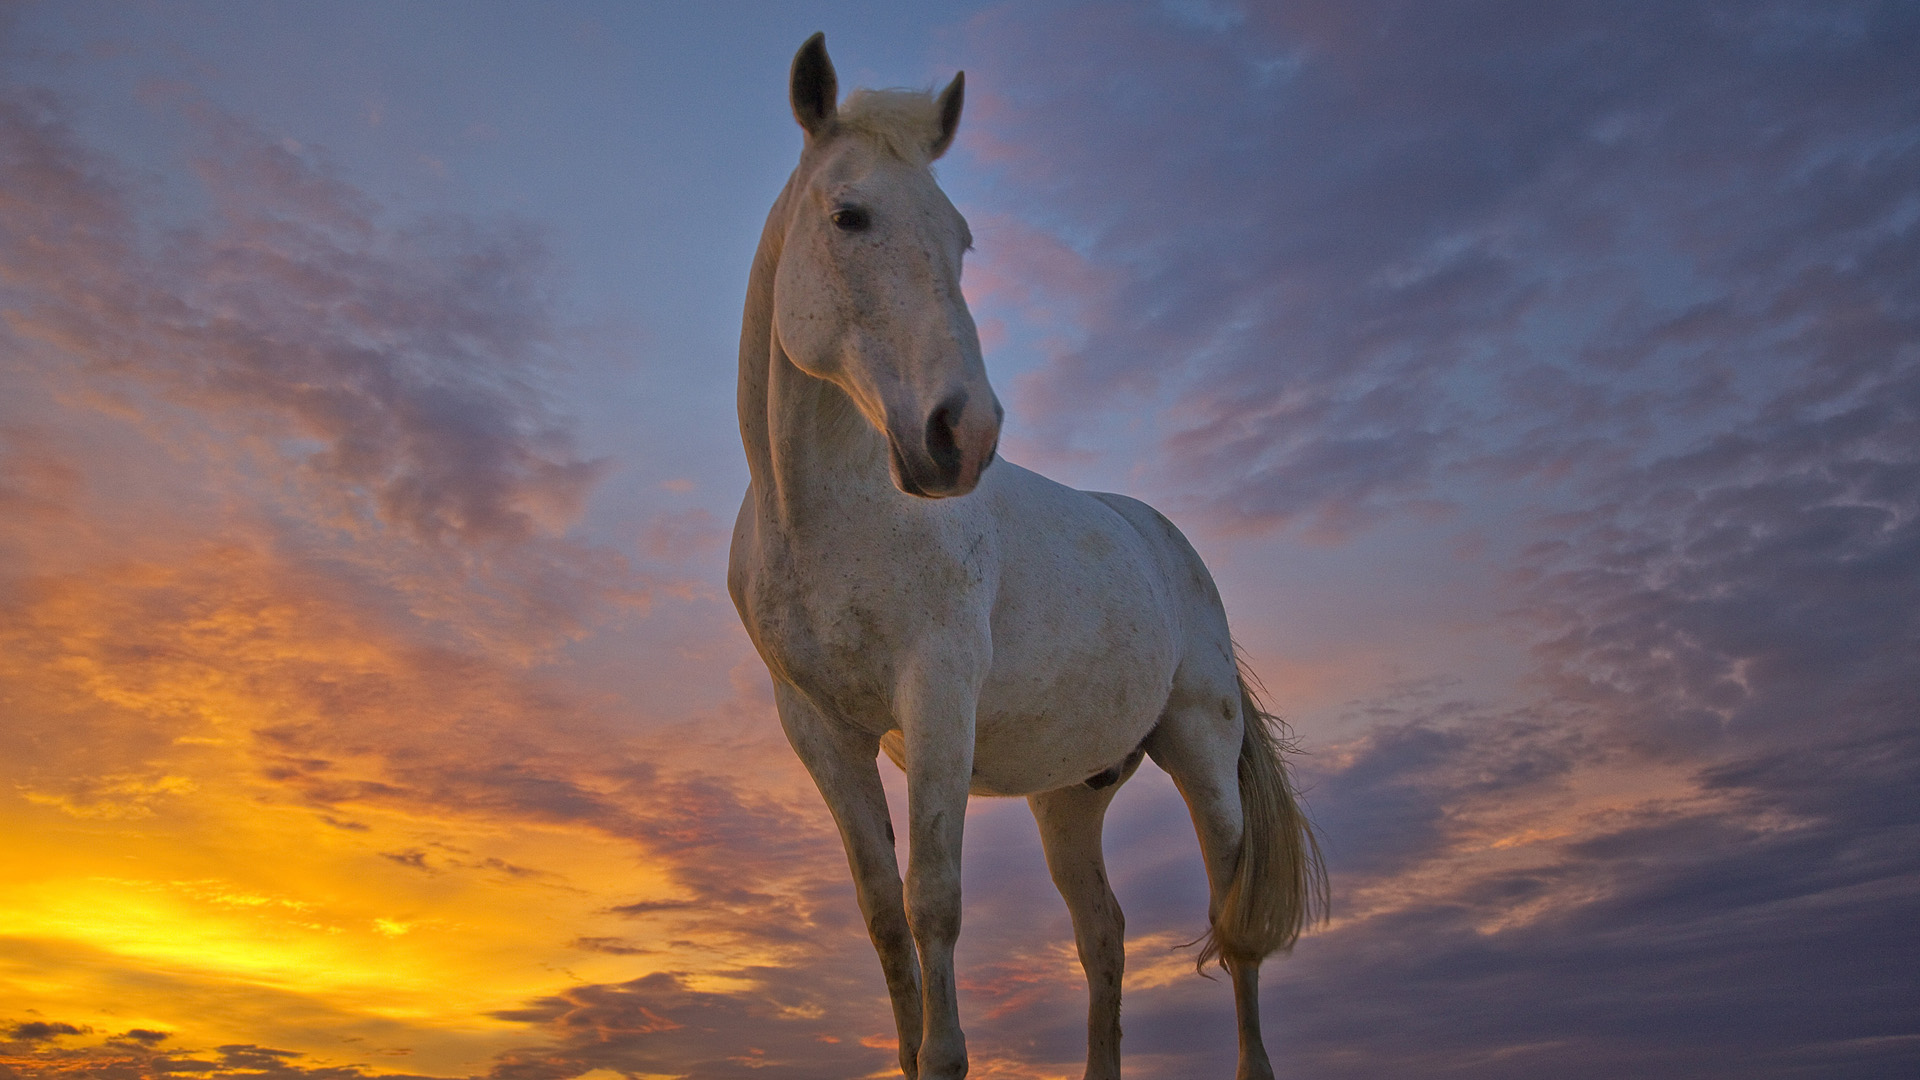 Horse HD Wallpaper | Background Image | 1920x1080 | ID ...